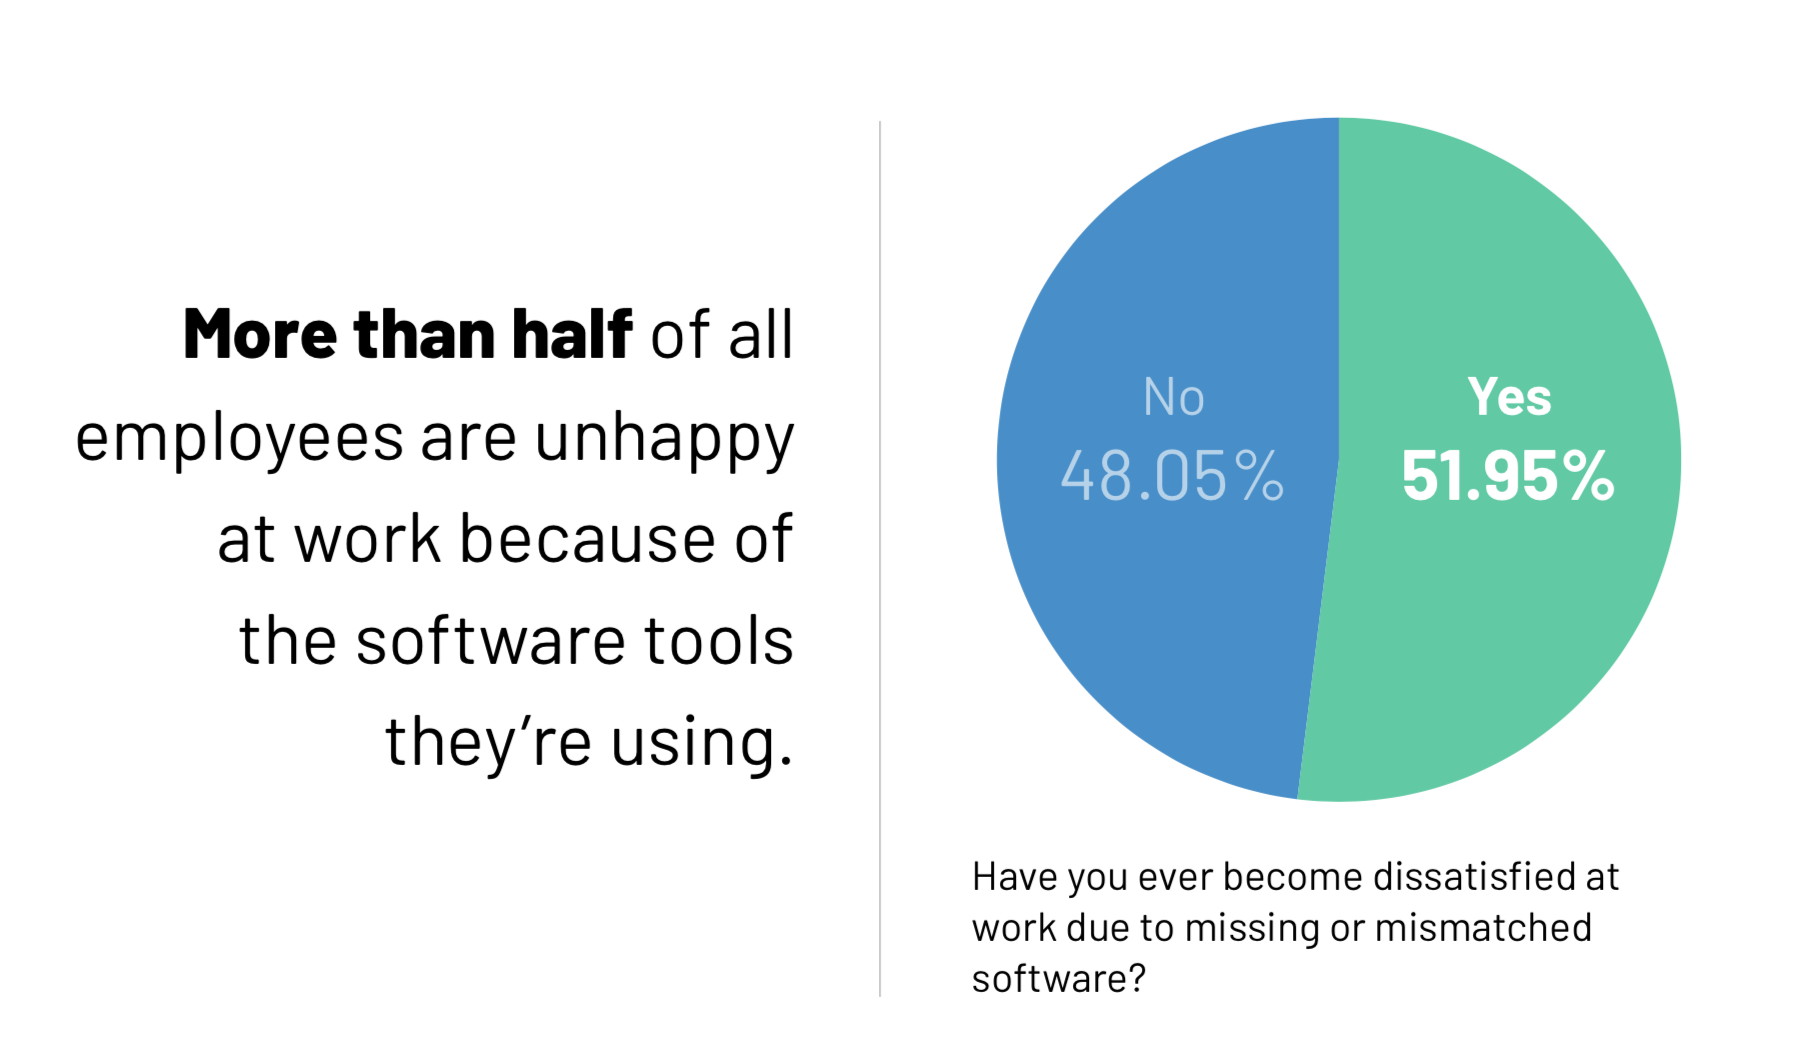 The wrong software makes employees dissatisfied